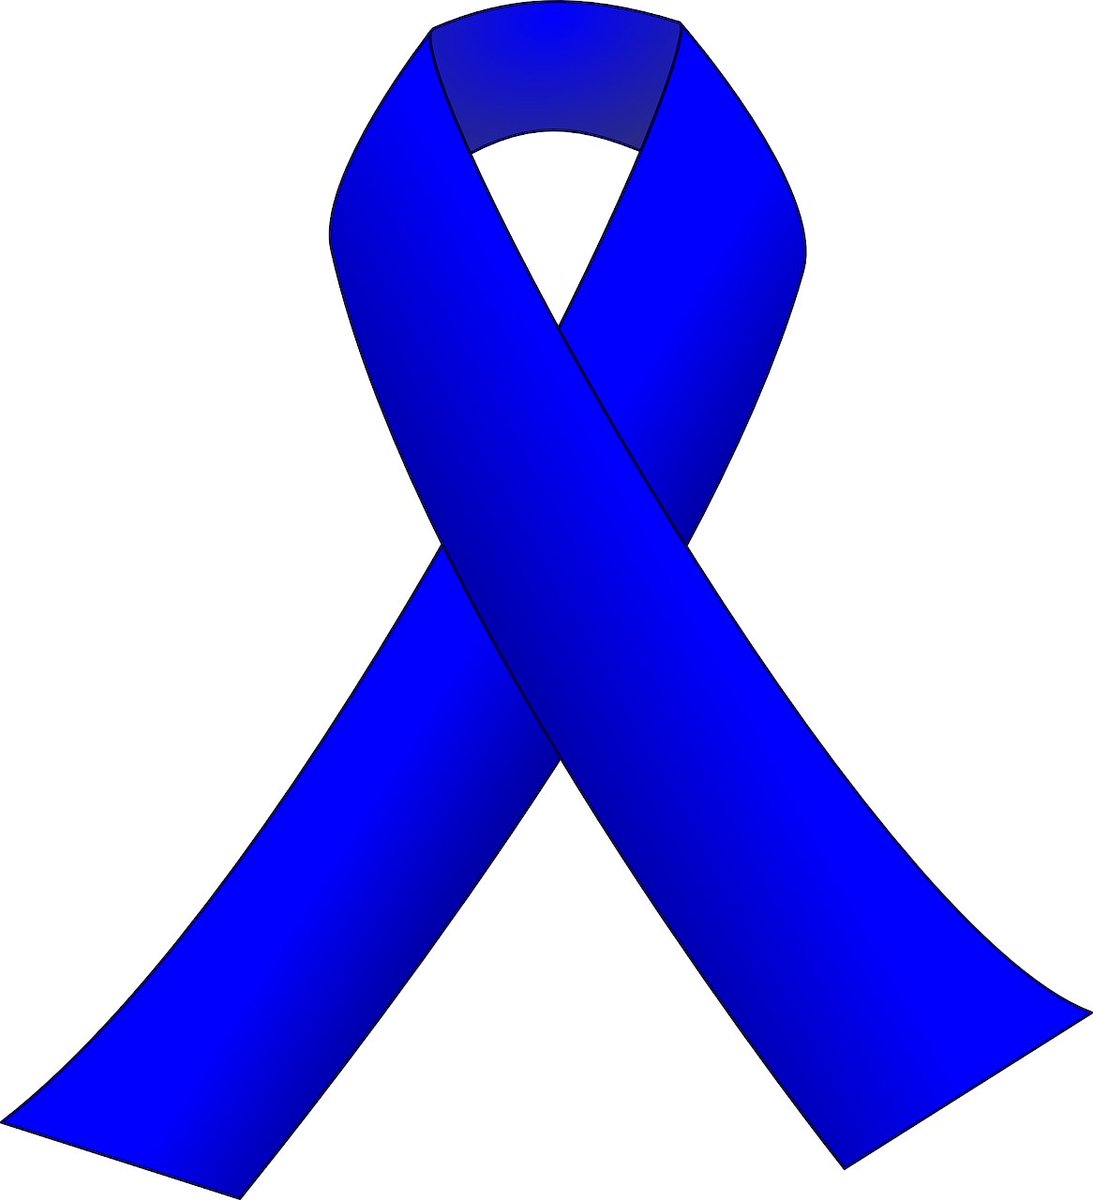 Today (12th May) is International ME Awareness Day. On this important day, organisations and individuals recognise and support the millions of people world-wide who are affected by ME and other chronic immunological and neurologic diseases by raising public awareness. #MECFS #ME